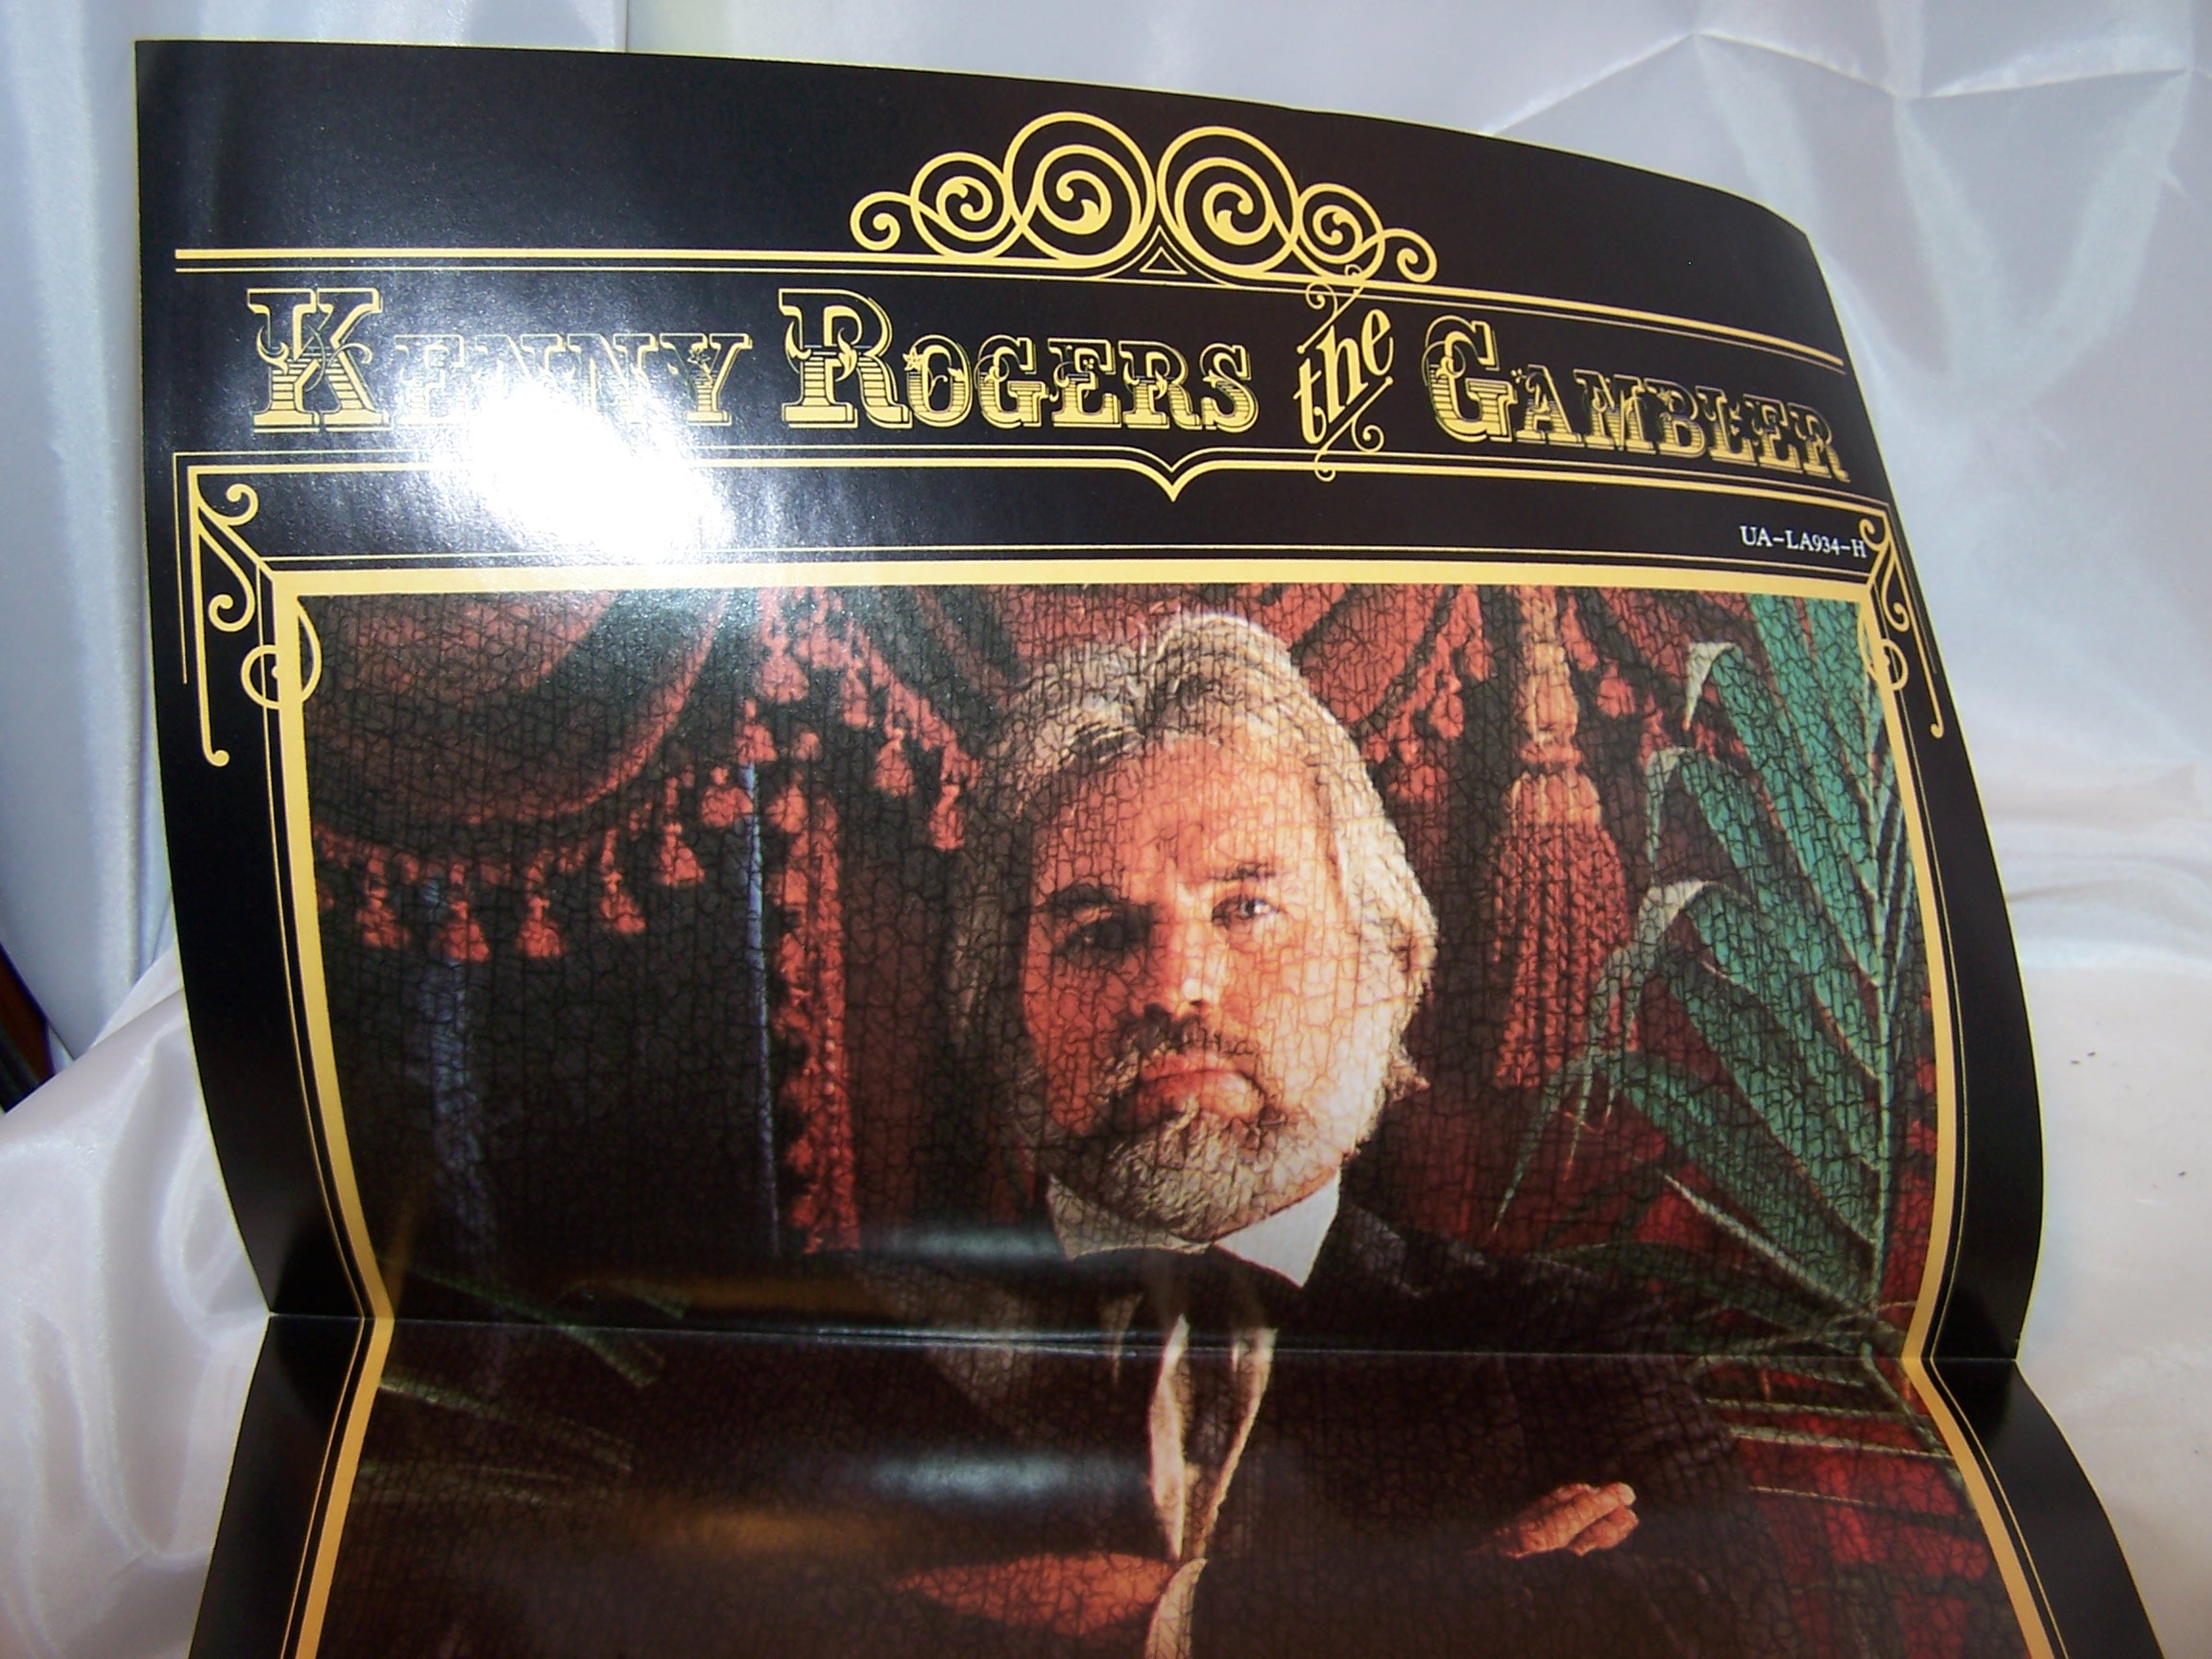 Image 5 of Kenny Rogers The Gambler Record Album, Poster, 1978